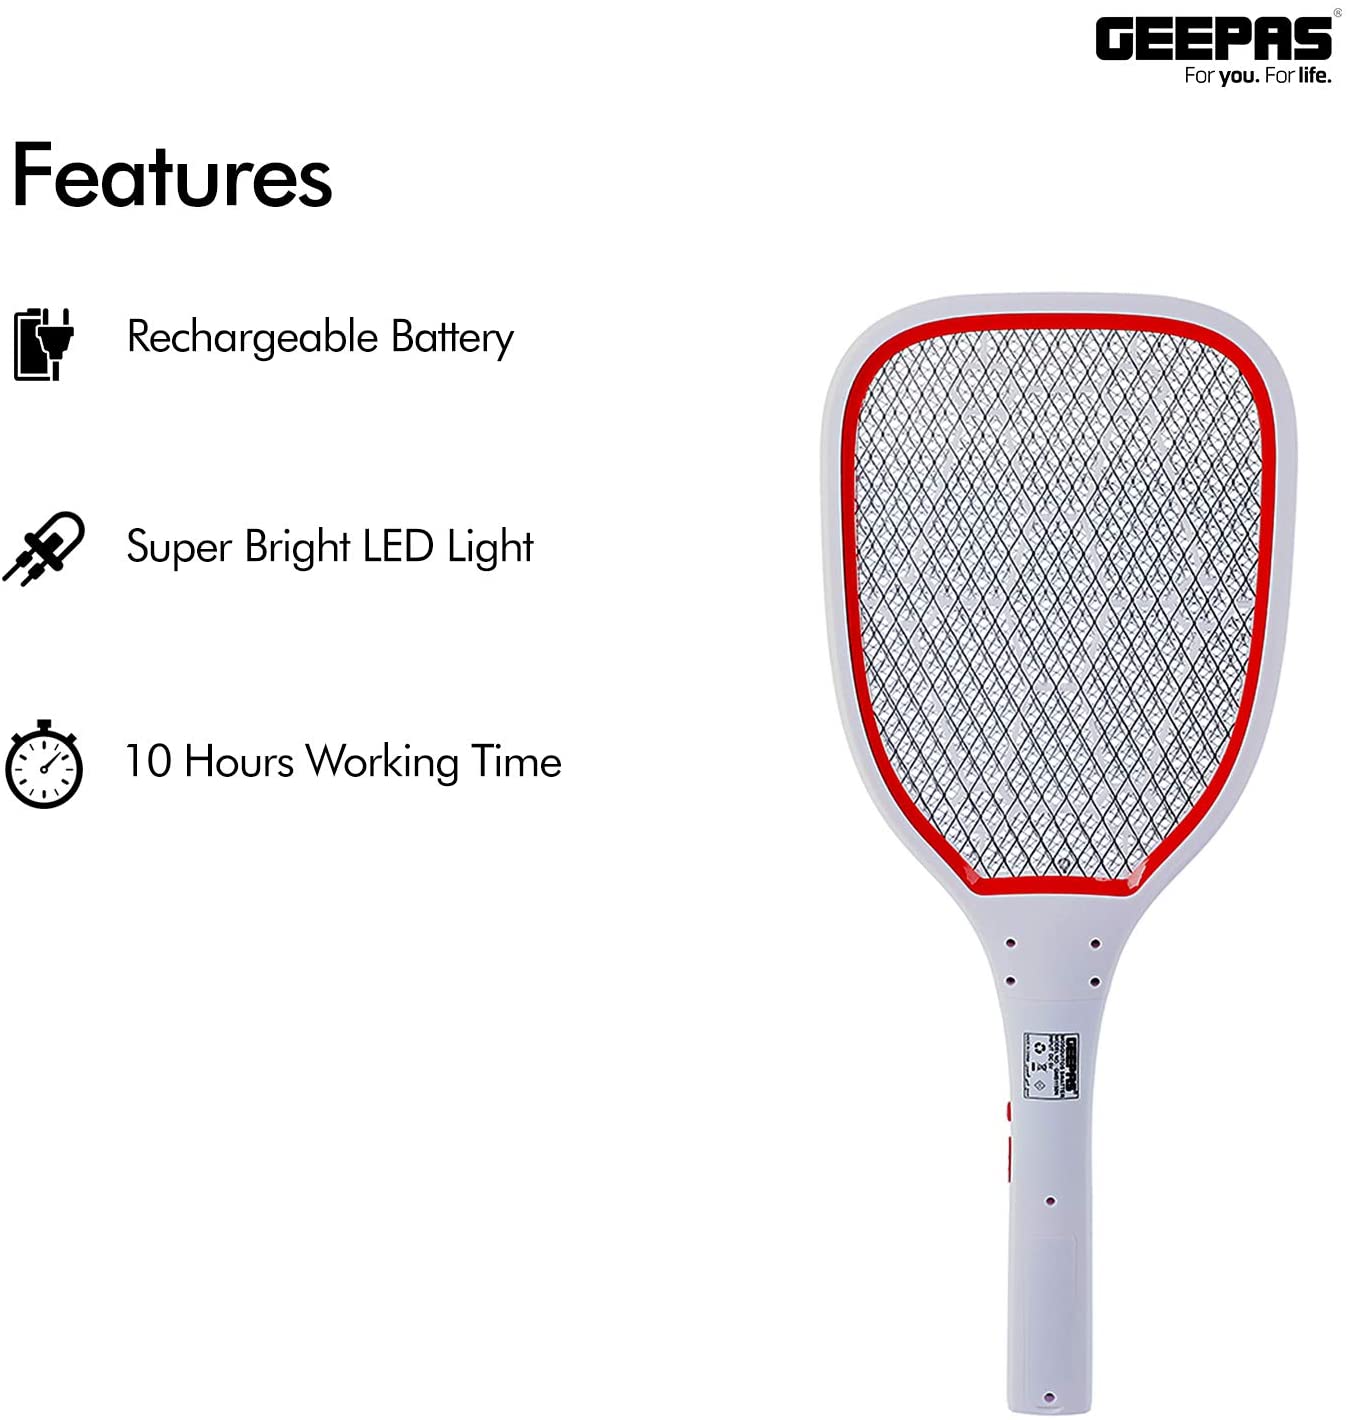 Geepas Mosquito And Fly Insect Killer | in Bahrain | Halabh.com